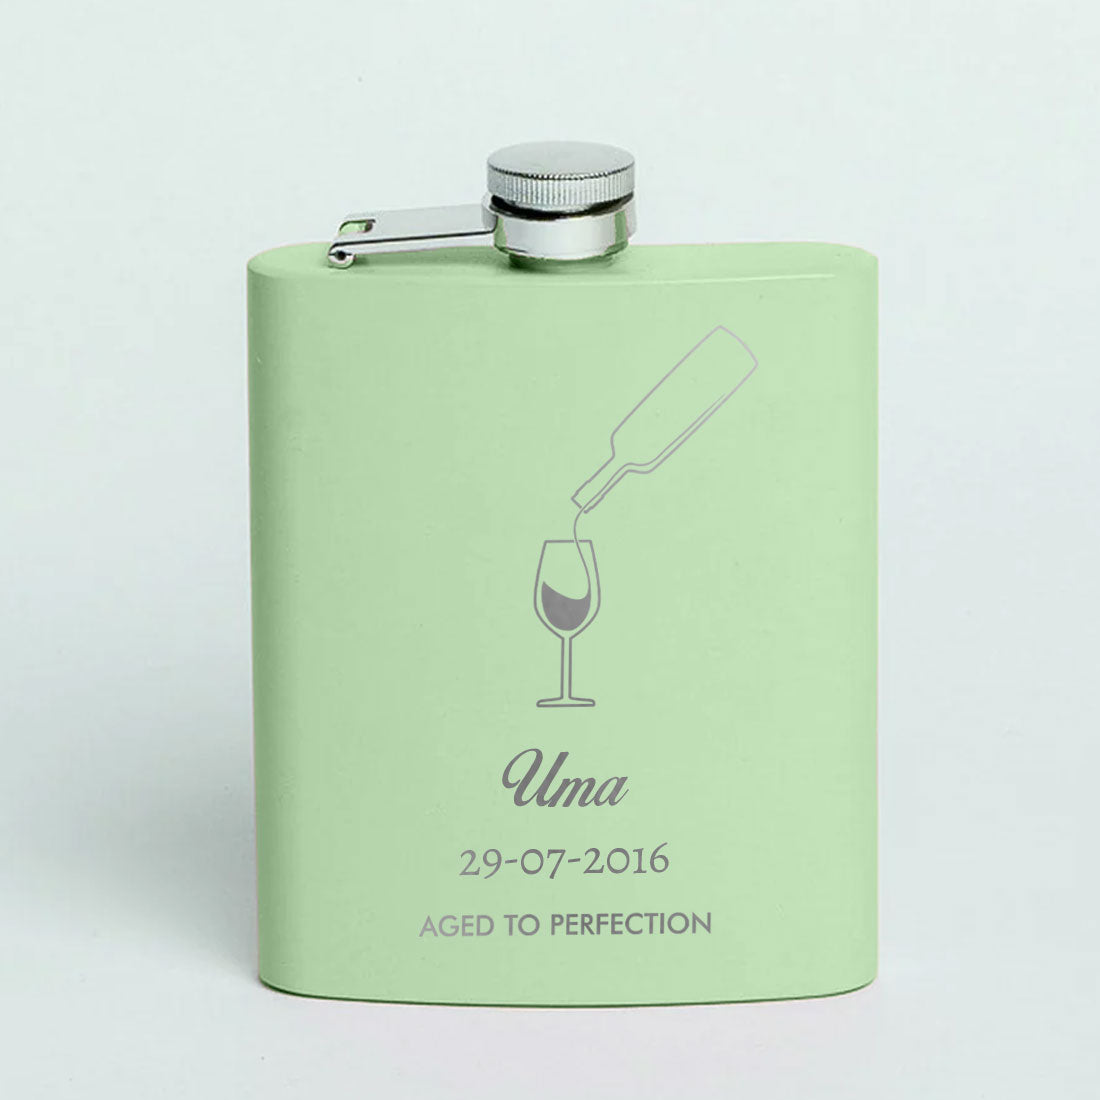 Customized Womens Hip Flask Stainless Steel 8oz Pink Whiskey Flask with Funnel